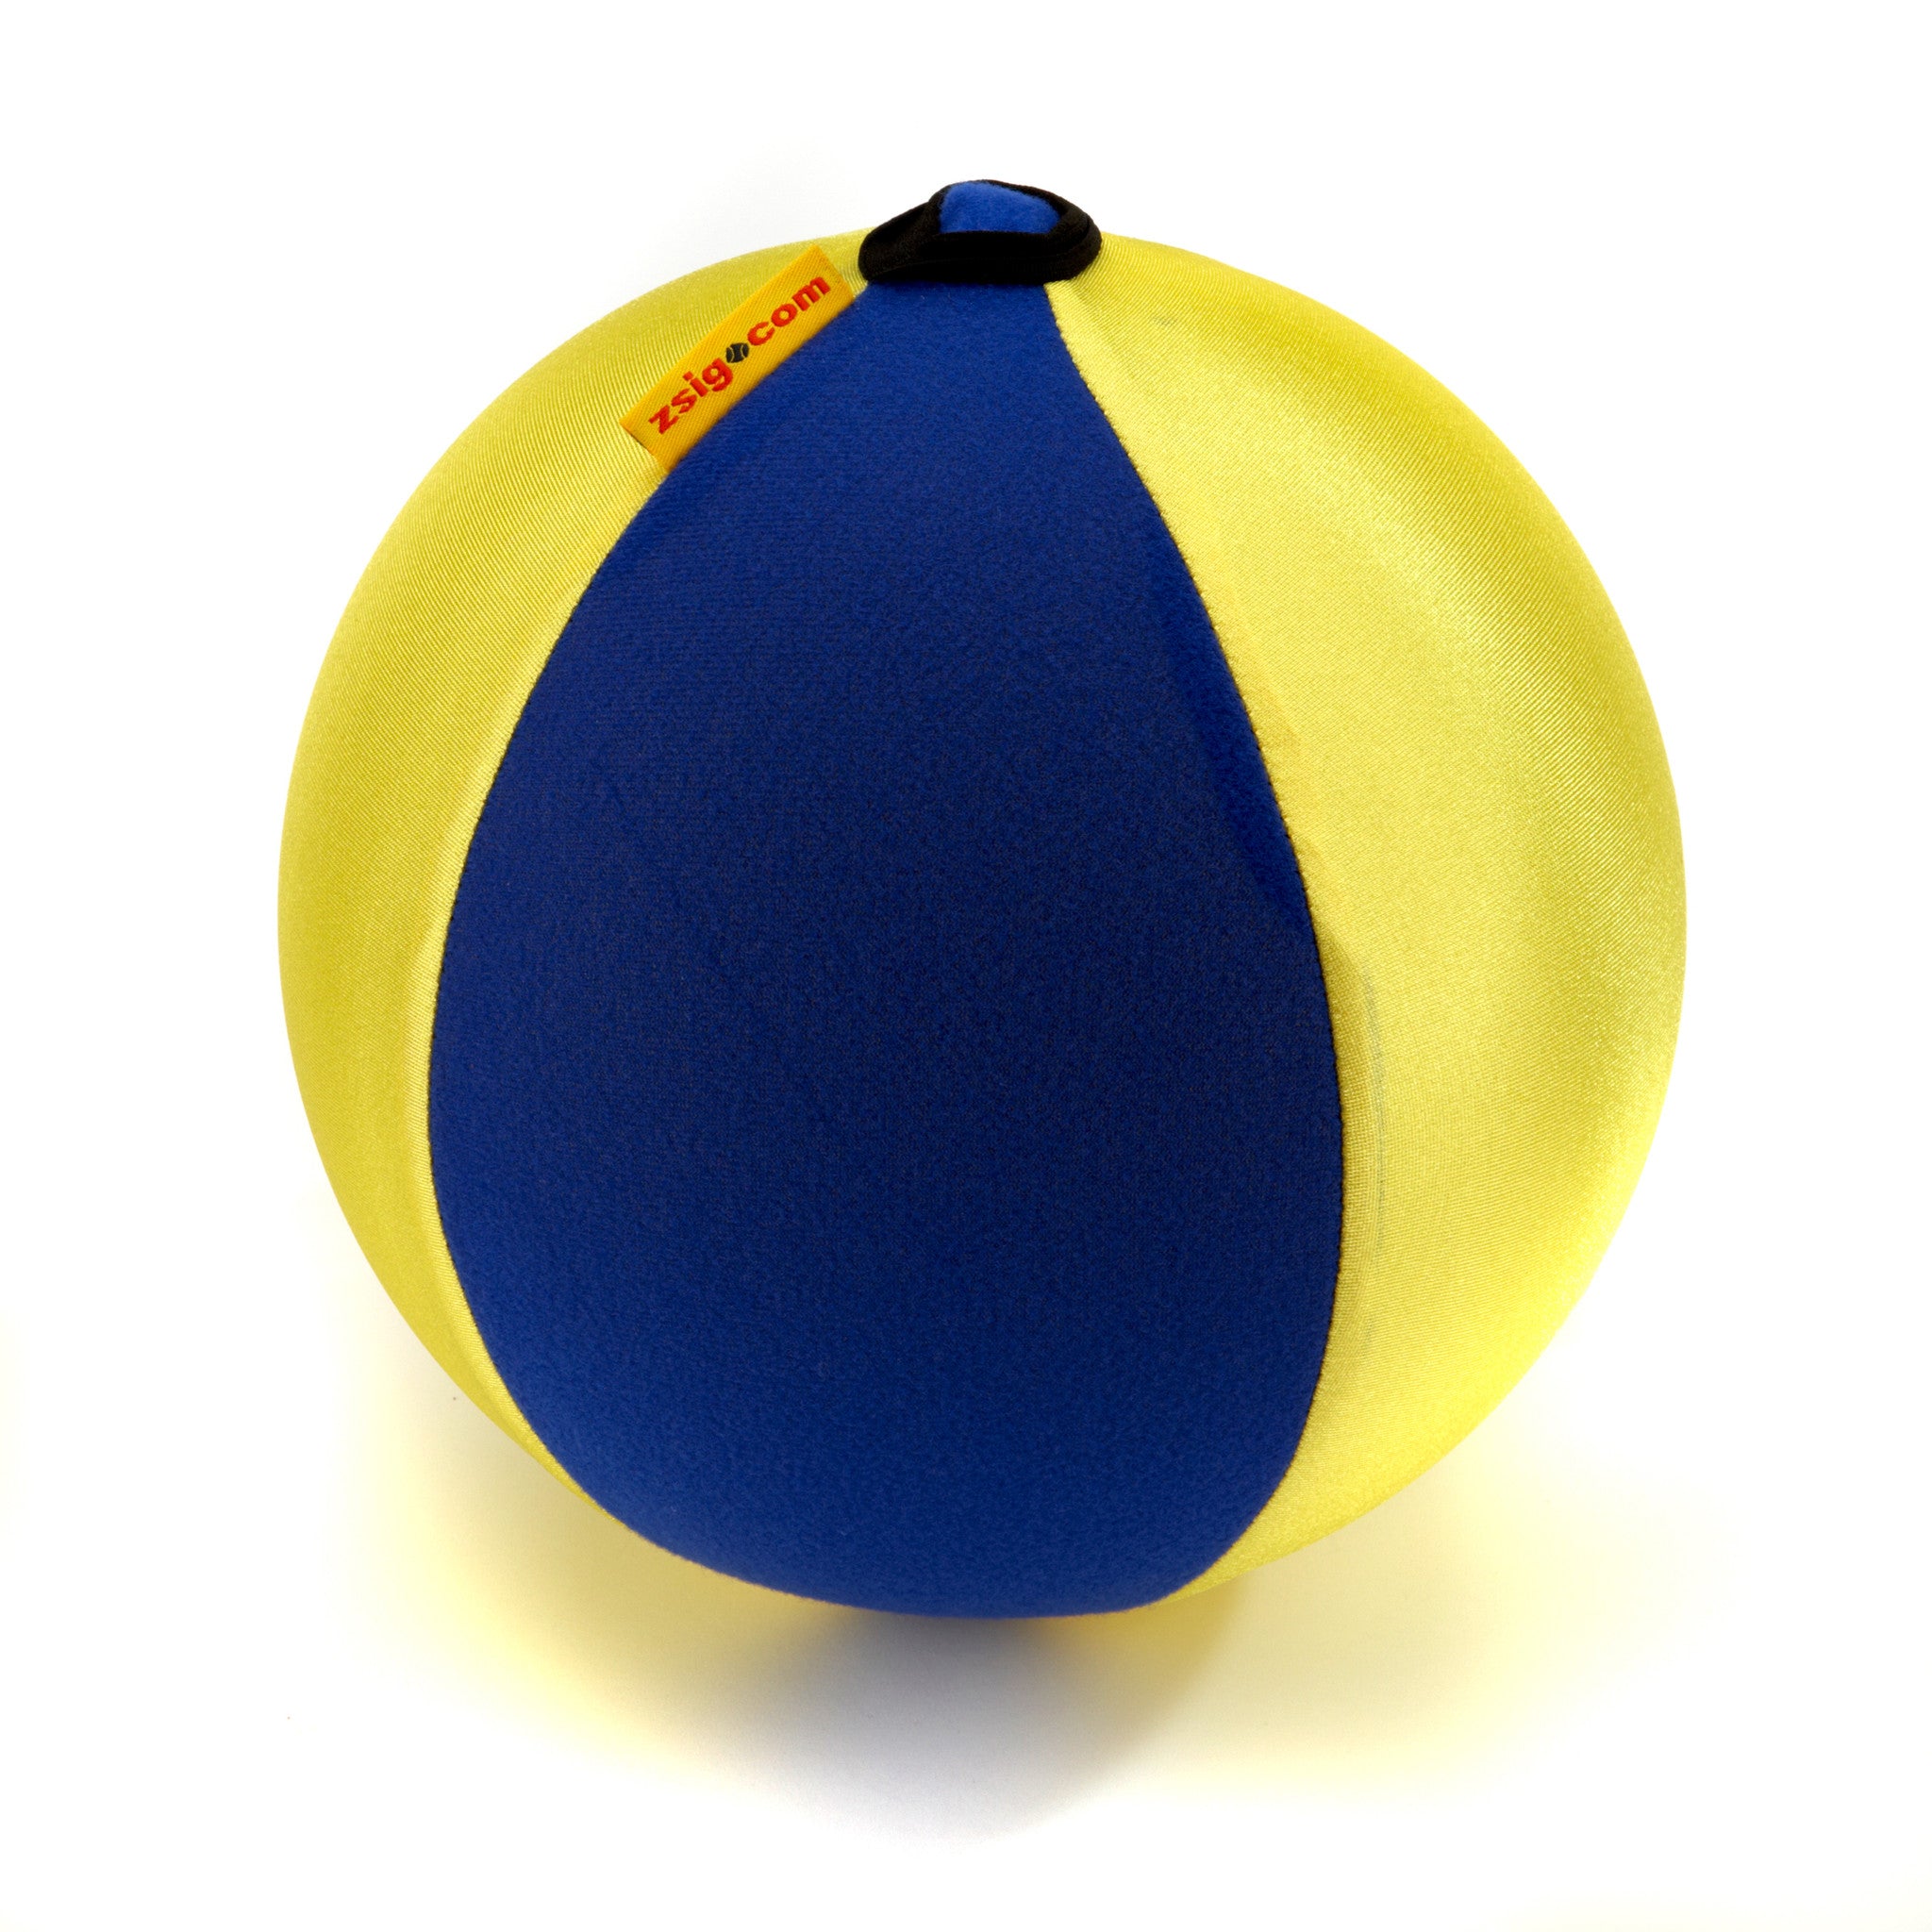 Balloon Ball. Coaching Aid. Quality stretch cover turns balloons into a light, floaty ball.